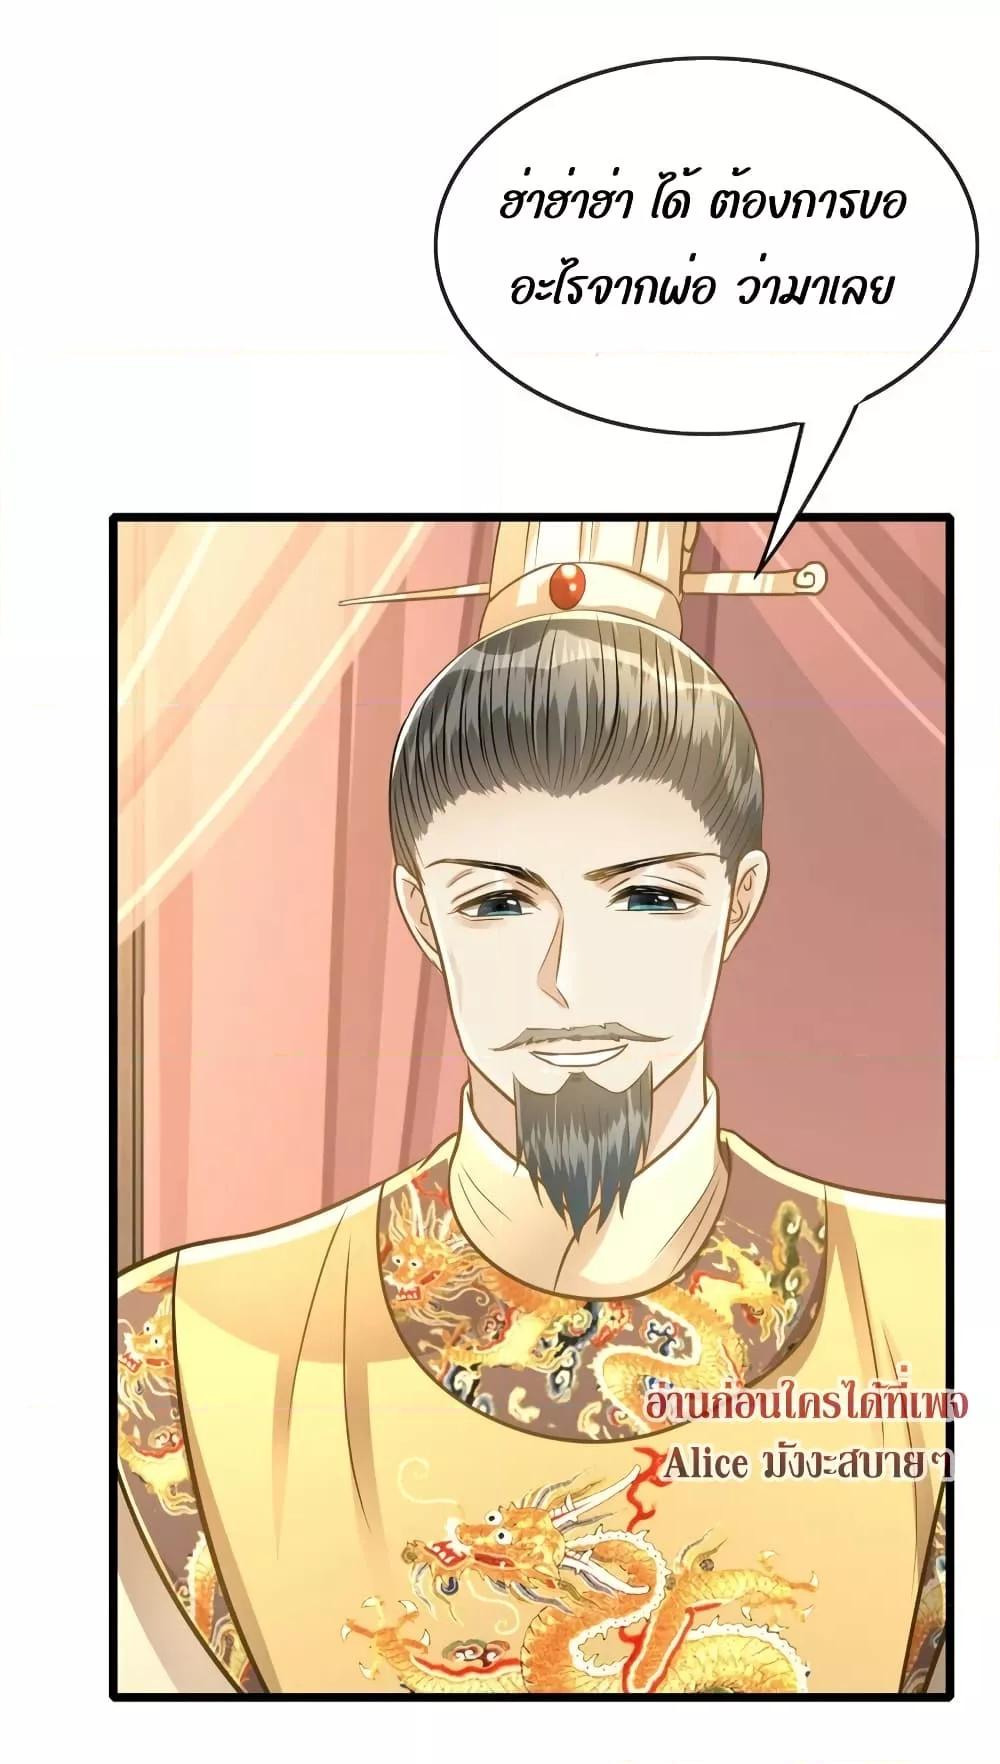 But what if His Royal Highness is 12 (43)